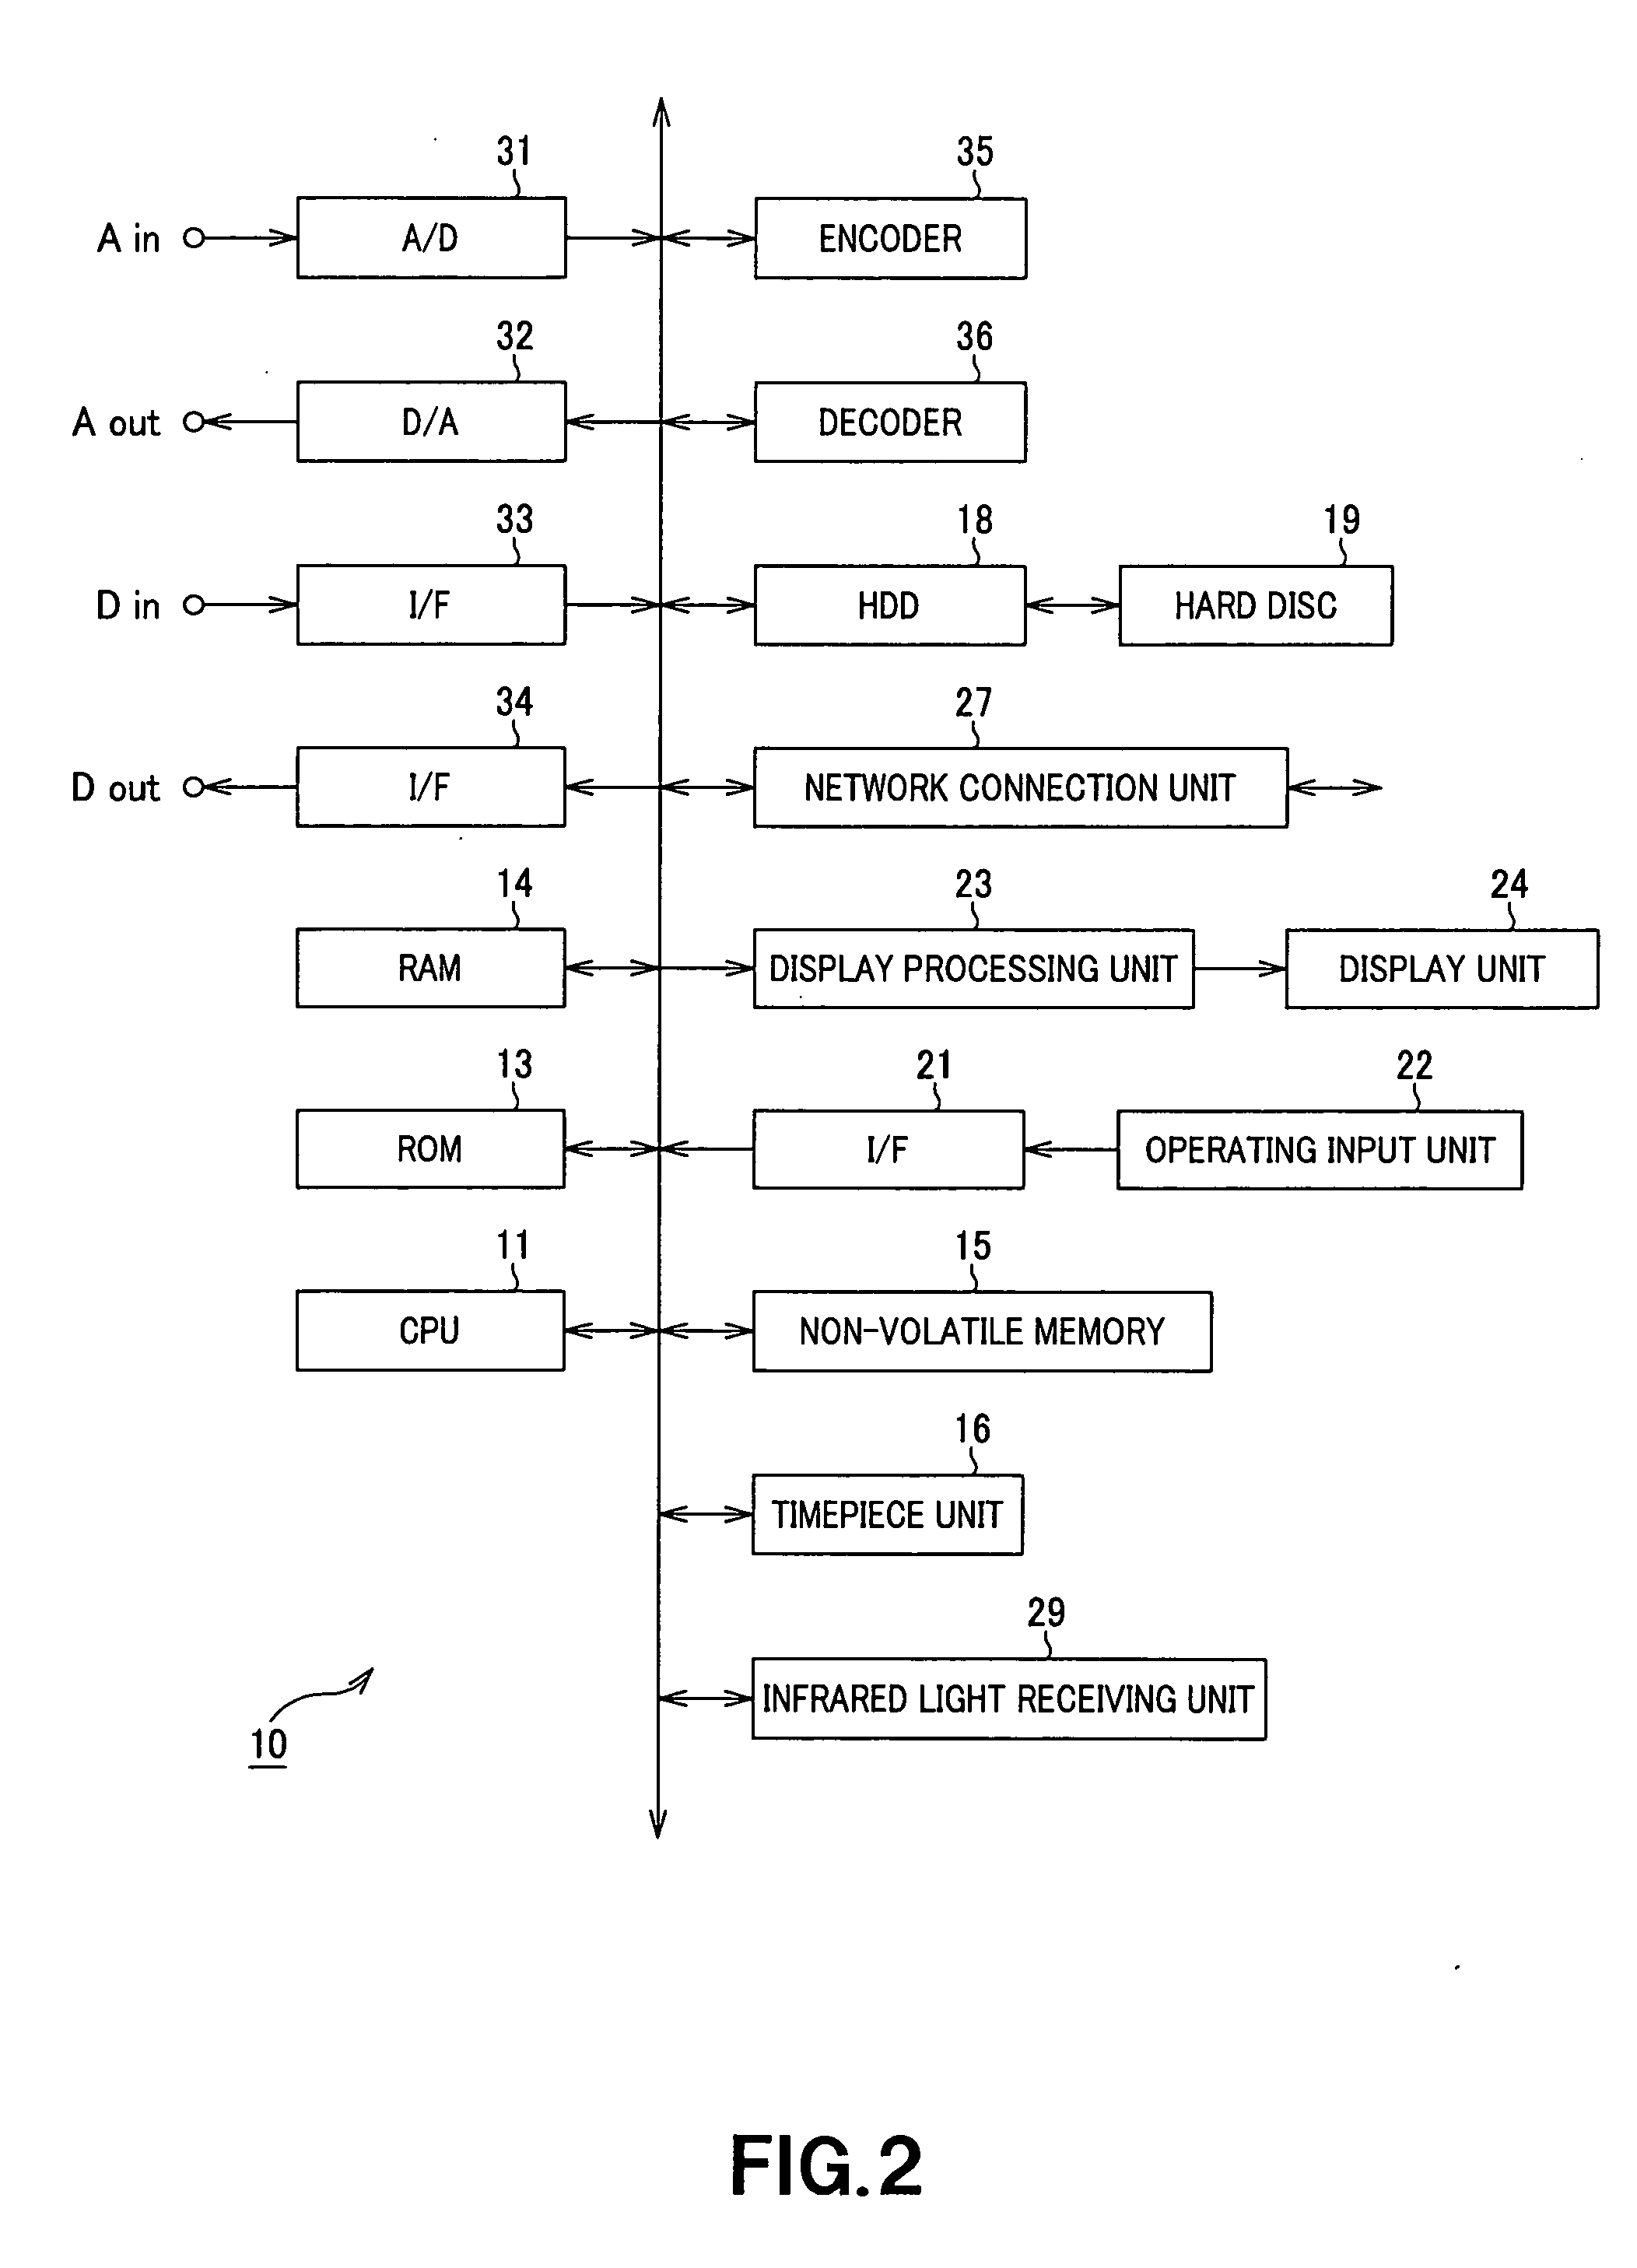 Electronic apparatus, method for controlling functions of the apparatus and server